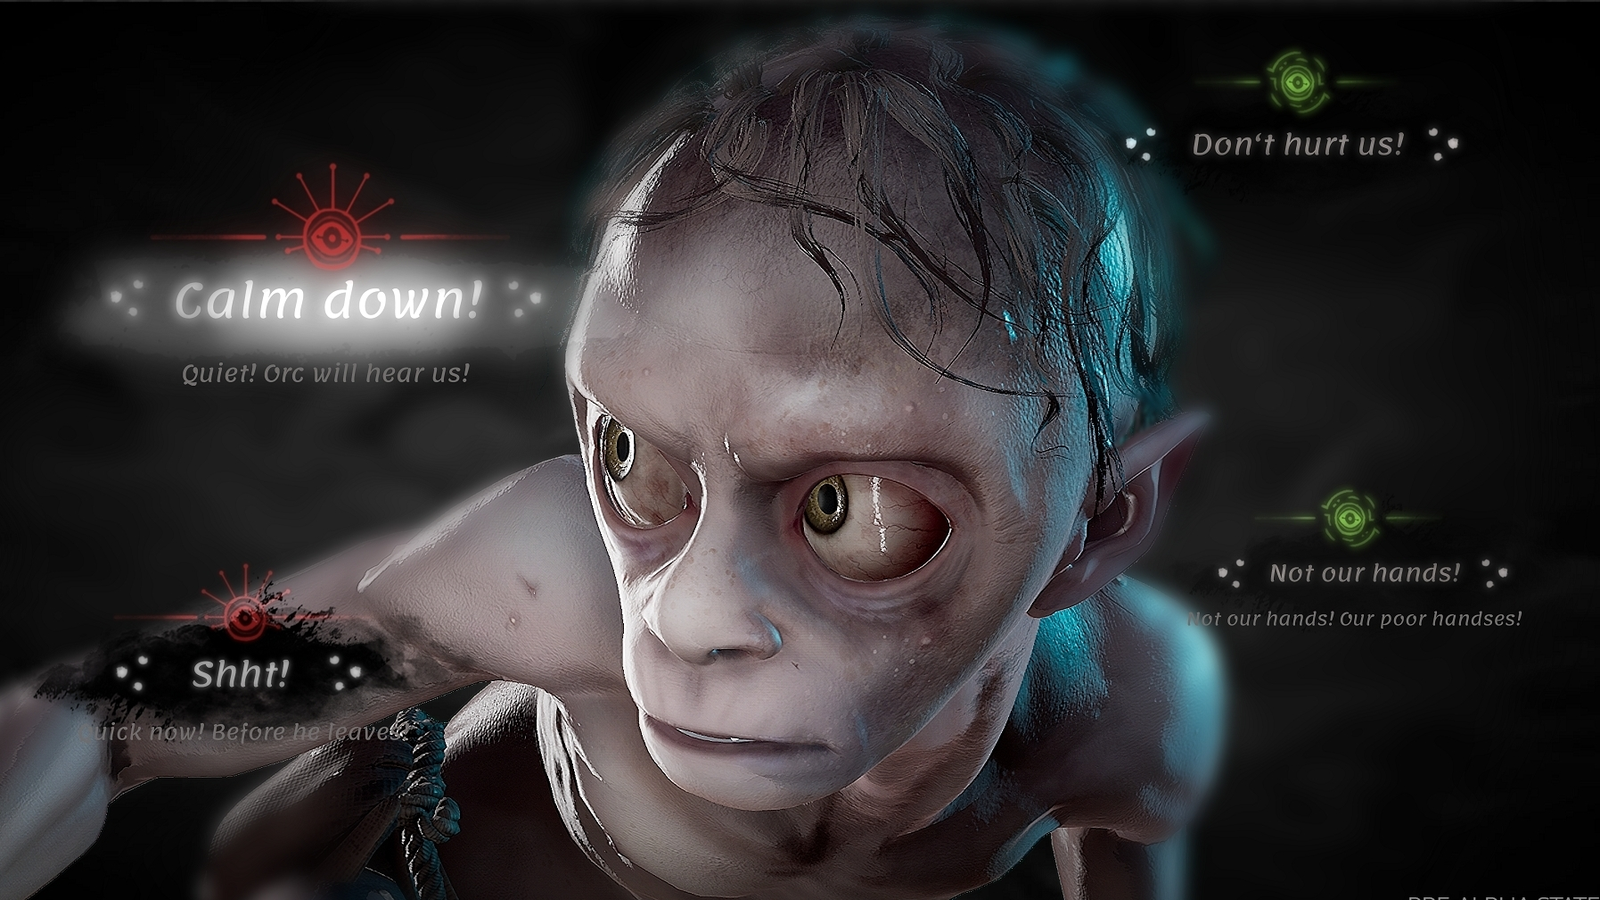 Ps5's Lord of the rings Gollum, what do u guys think? #gaming #lordoft